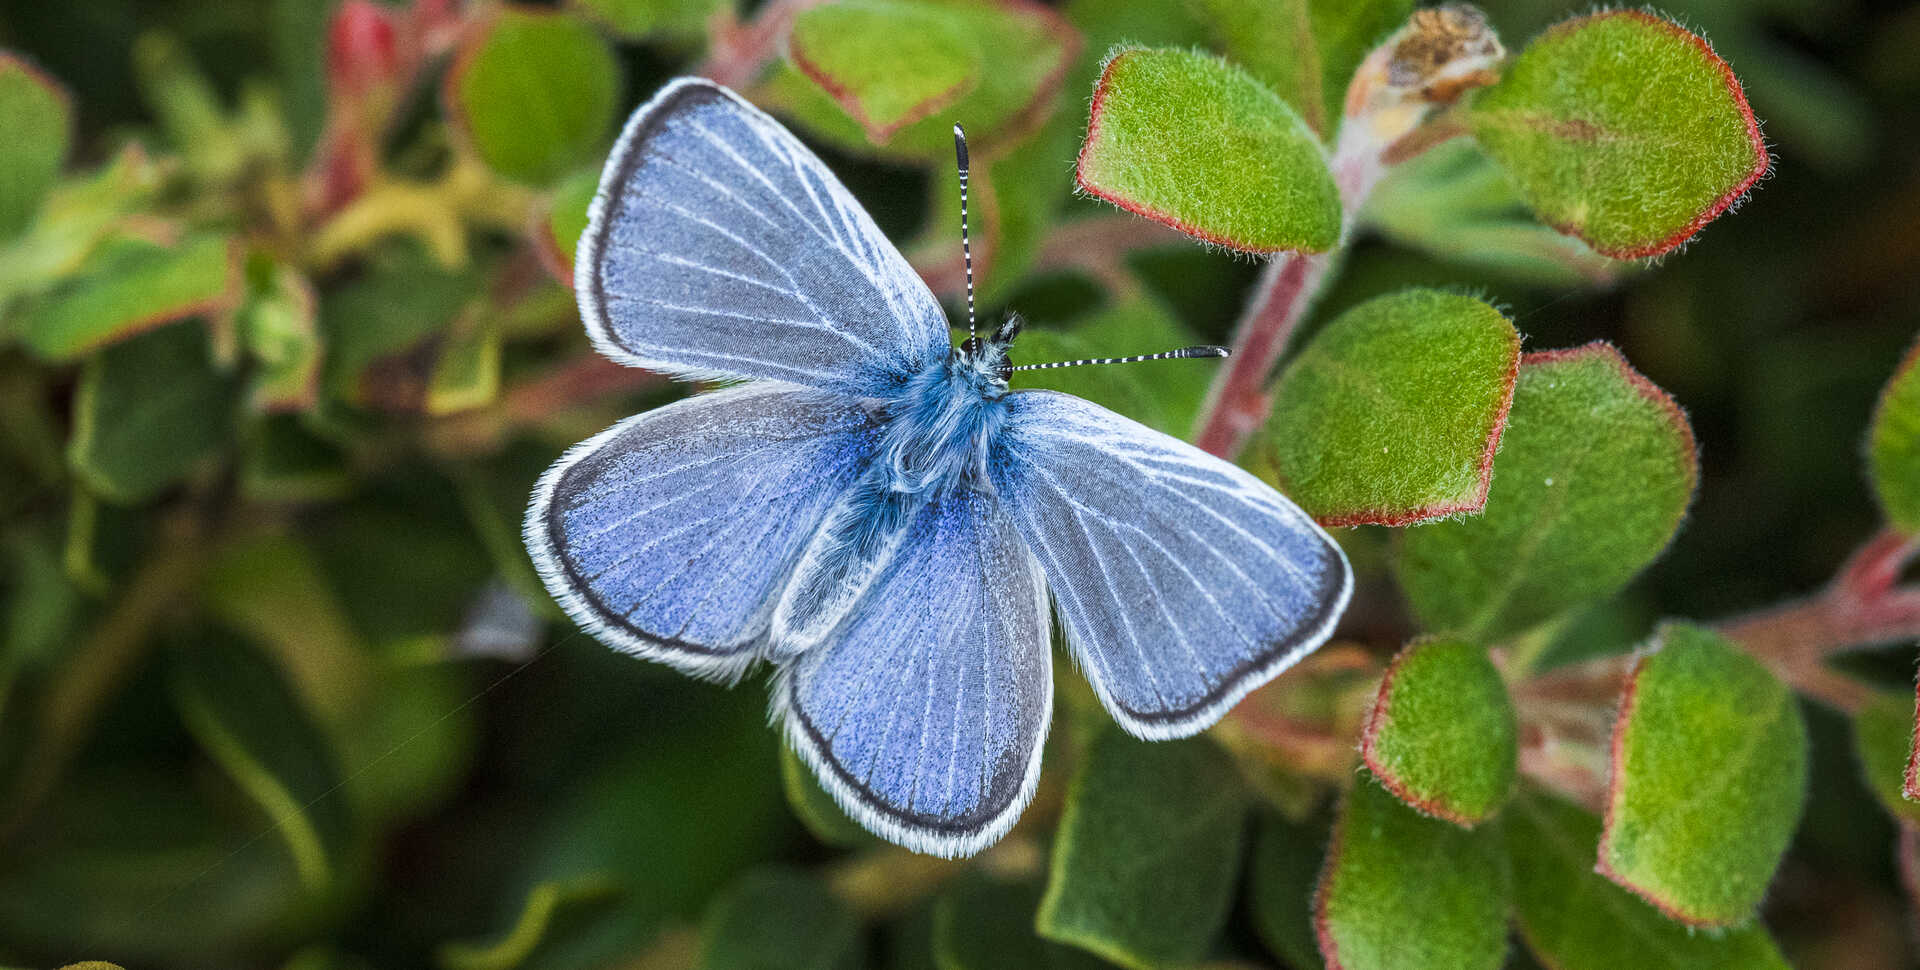 Closeup of a silvery blue butterfly with wings outstretched on a plant. Photo by Gayle Laird